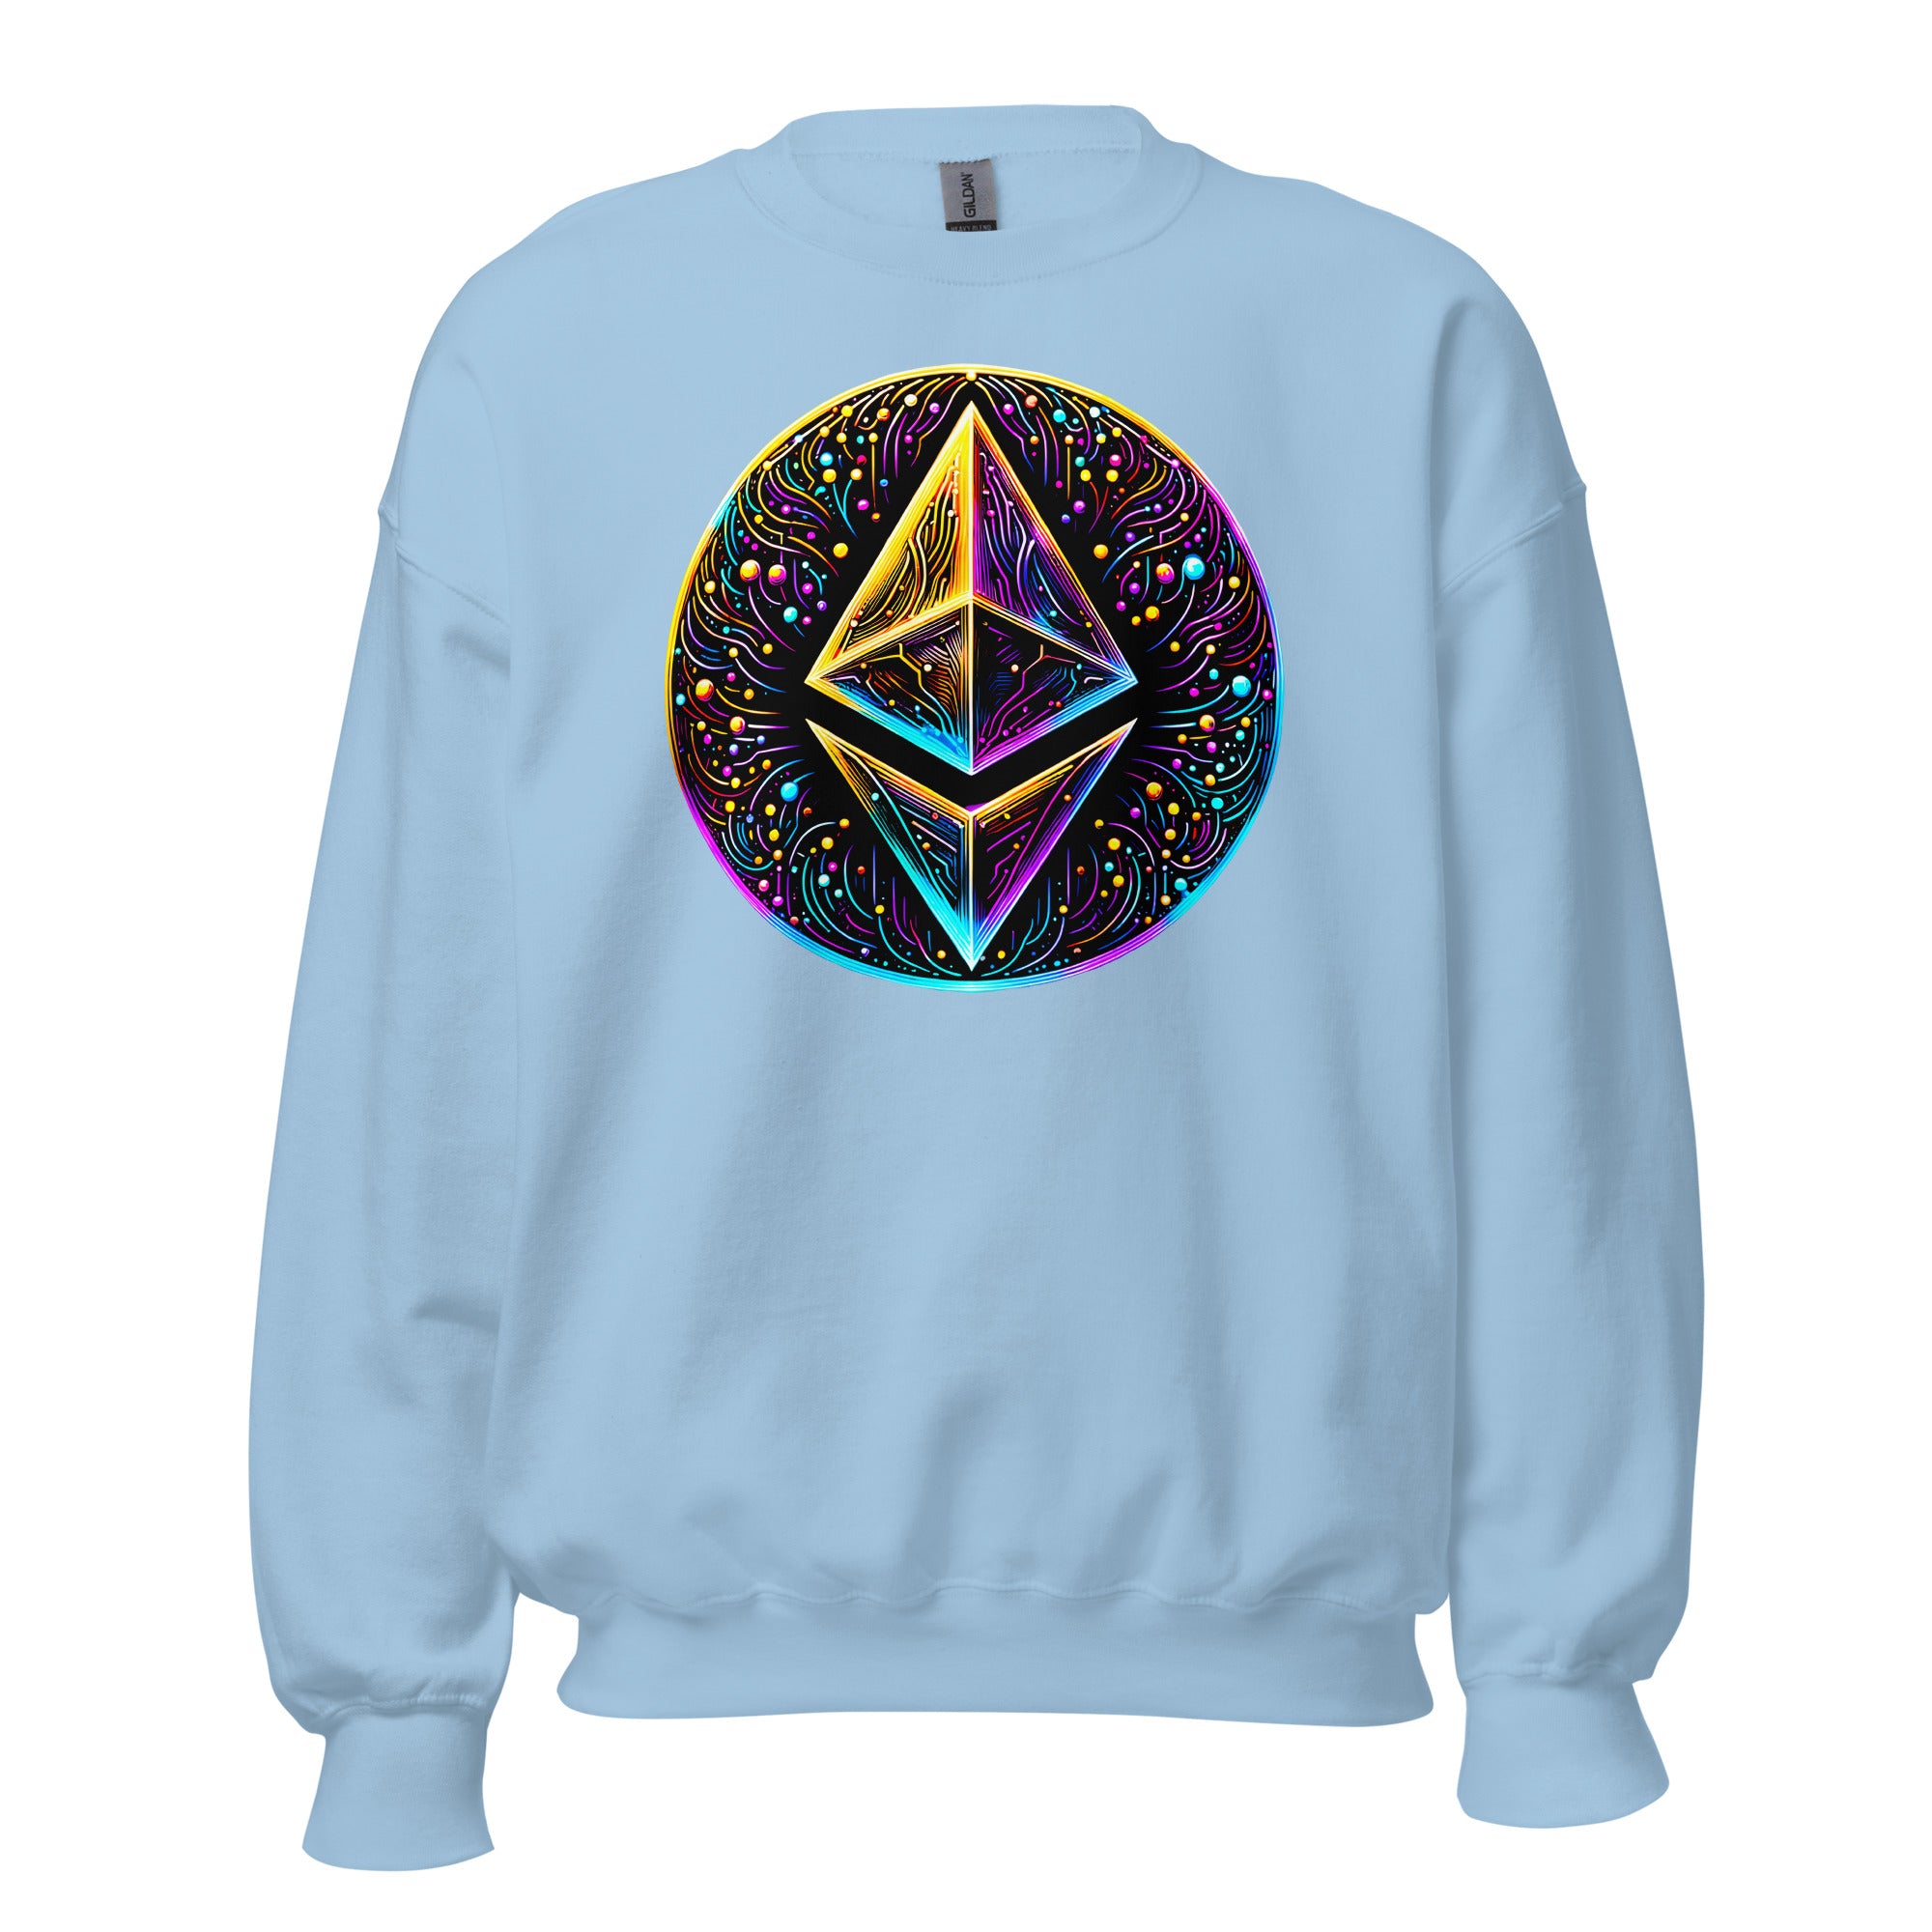 Whimsical Ethereum ETH Altcoin Crypto Symbol Sweatshirt Long Sleeve Pullover